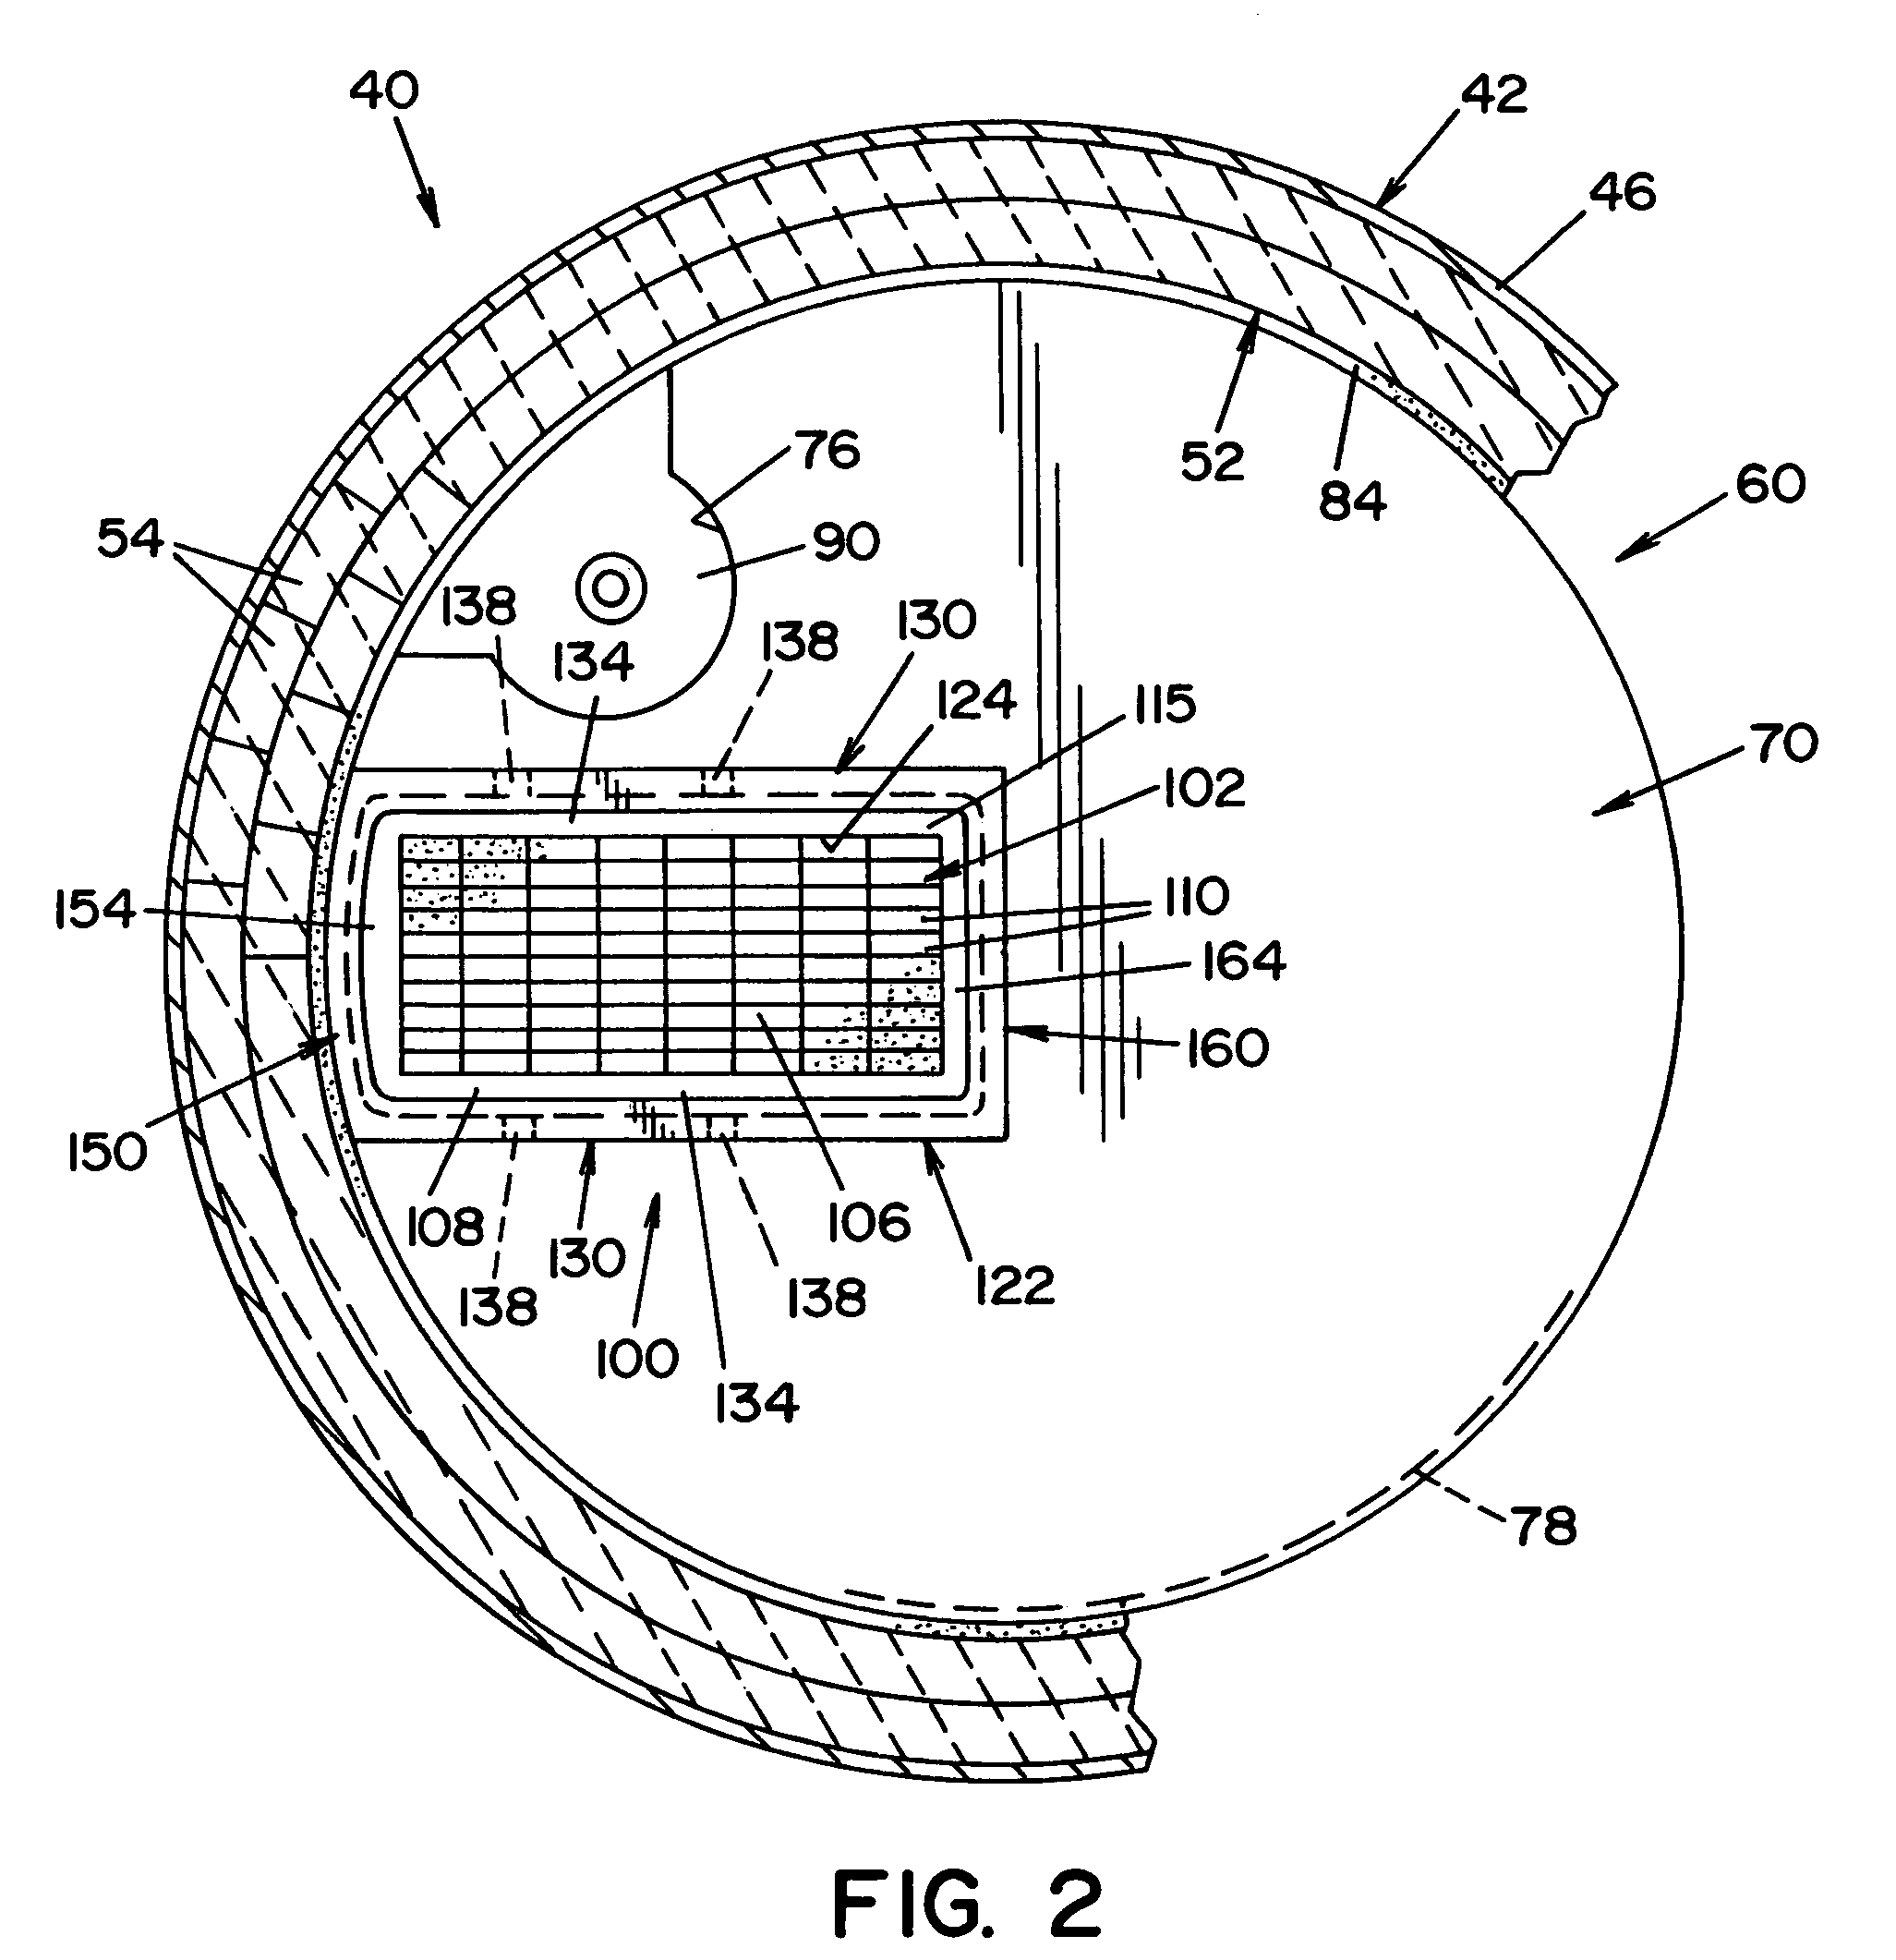 Impact pad for metallurgical vessels